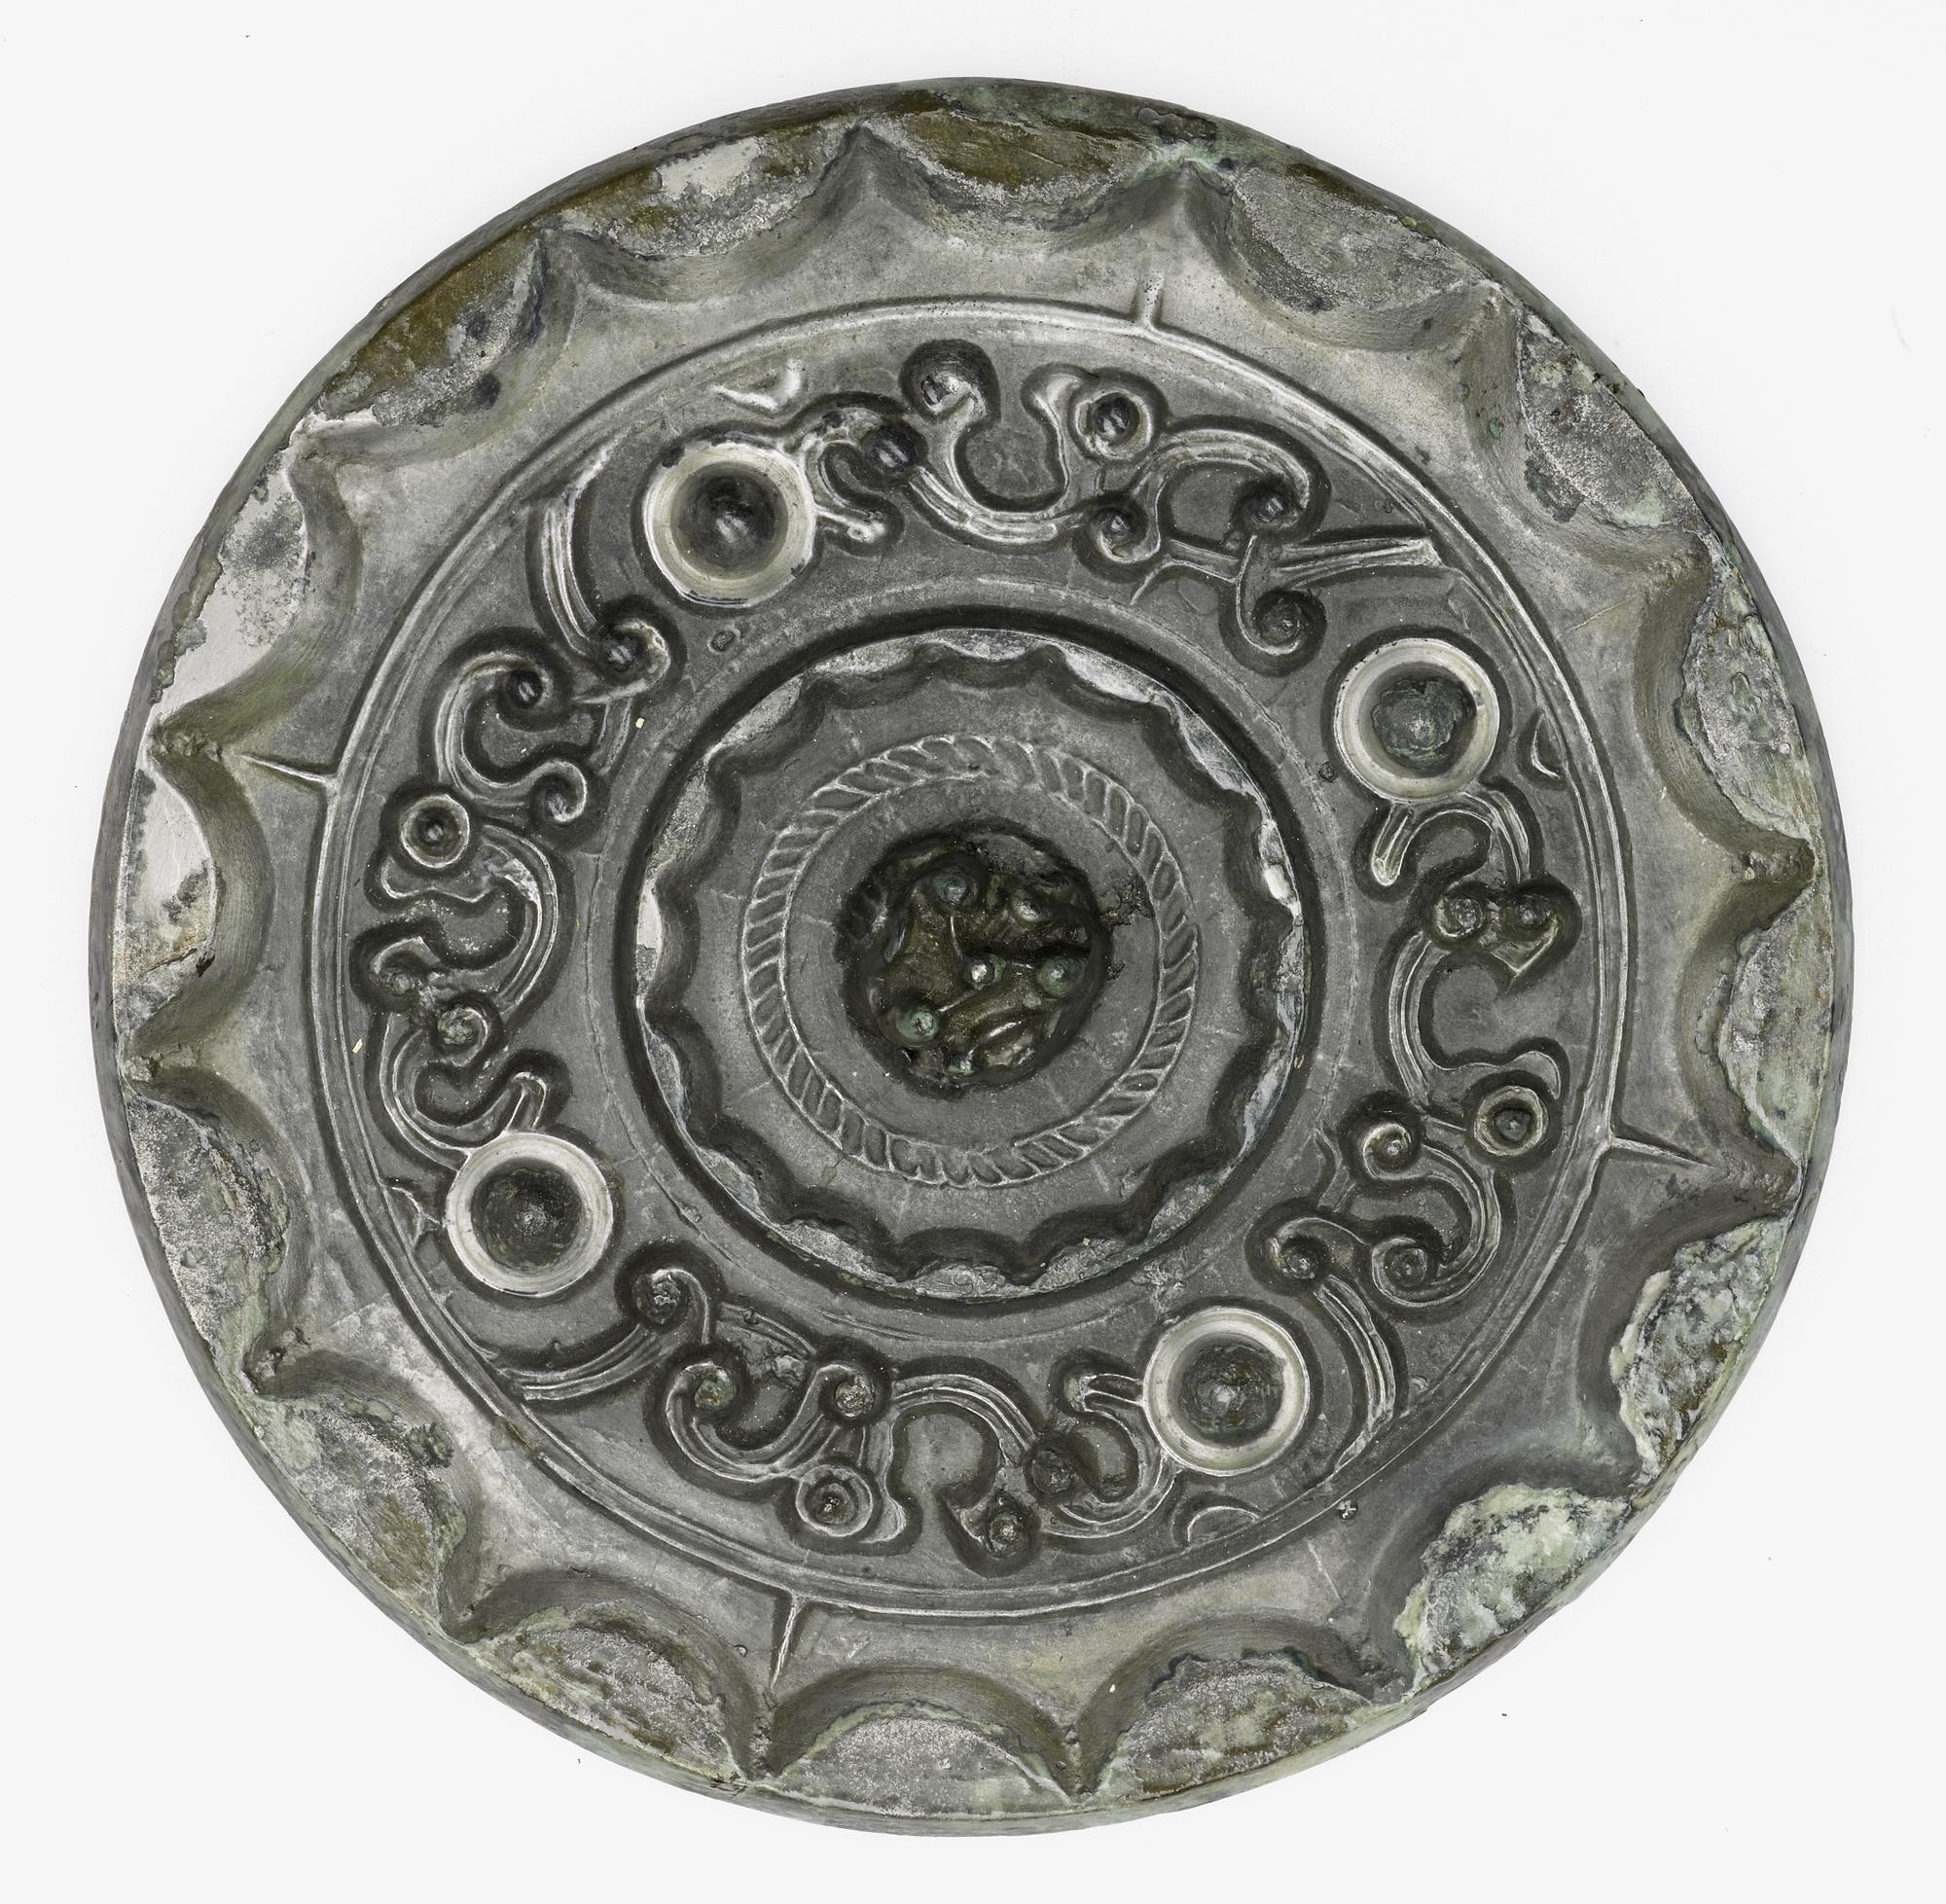 Mirror of silvered patinated bronze, with a central perforated boss in the form of a many-peaked mountain on the reverse: China, attributed to Tang dynasty, 618 - 907 AD.